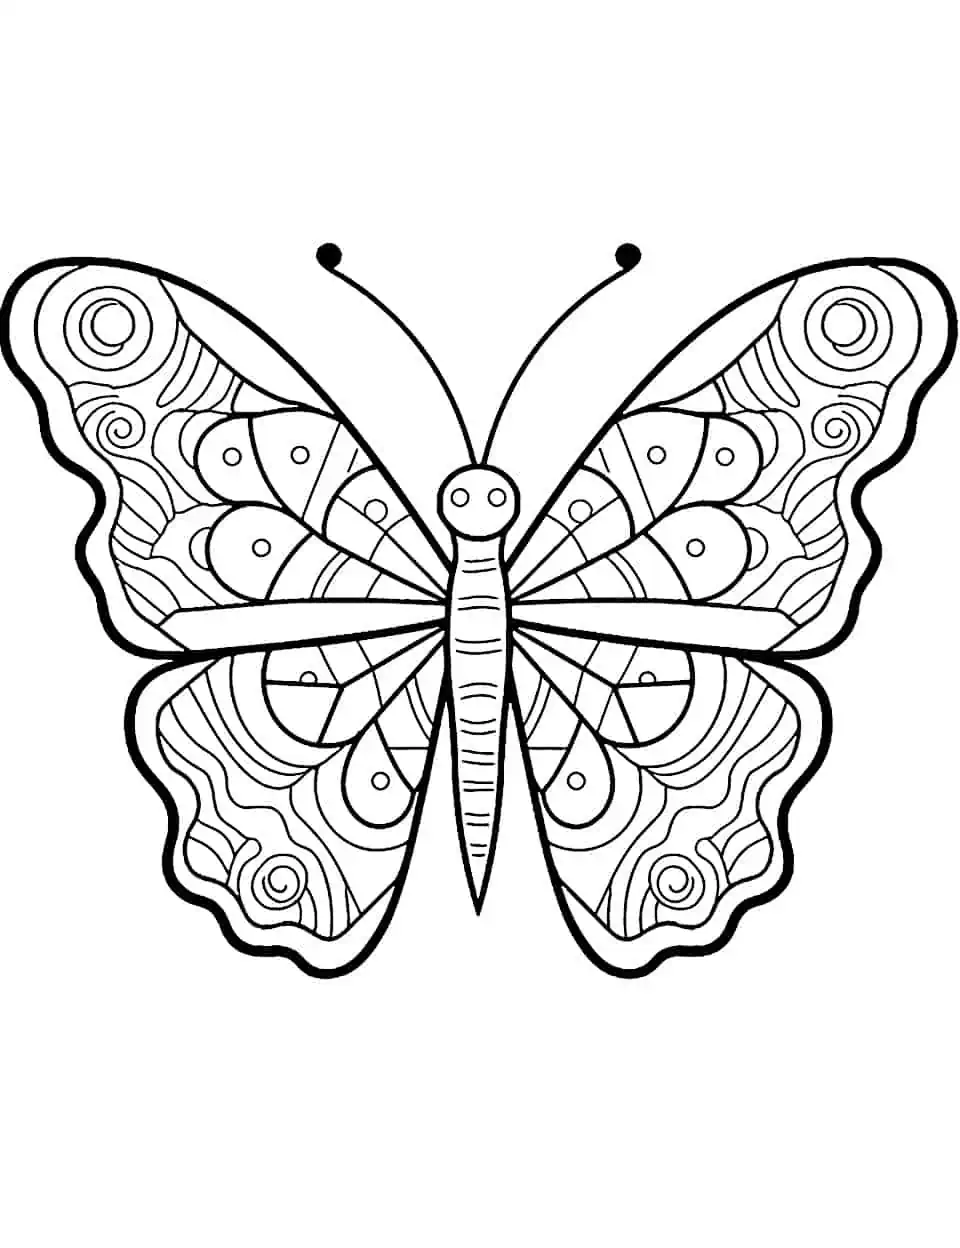 Geometric Beauty Butterfly Coloring Page - A coloring page showcasing a butterfly with geometric patterns and shapes.